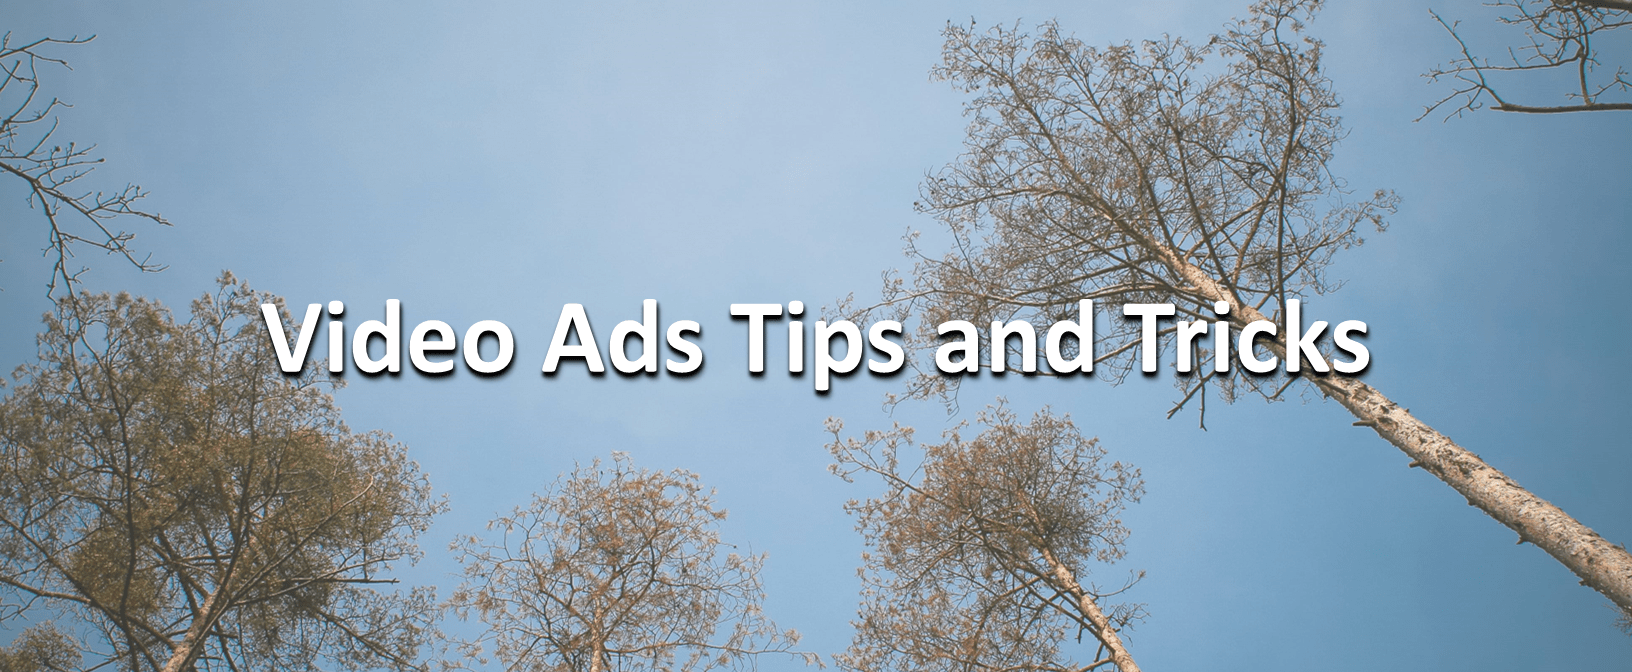 Video Ads Tips and Tricks